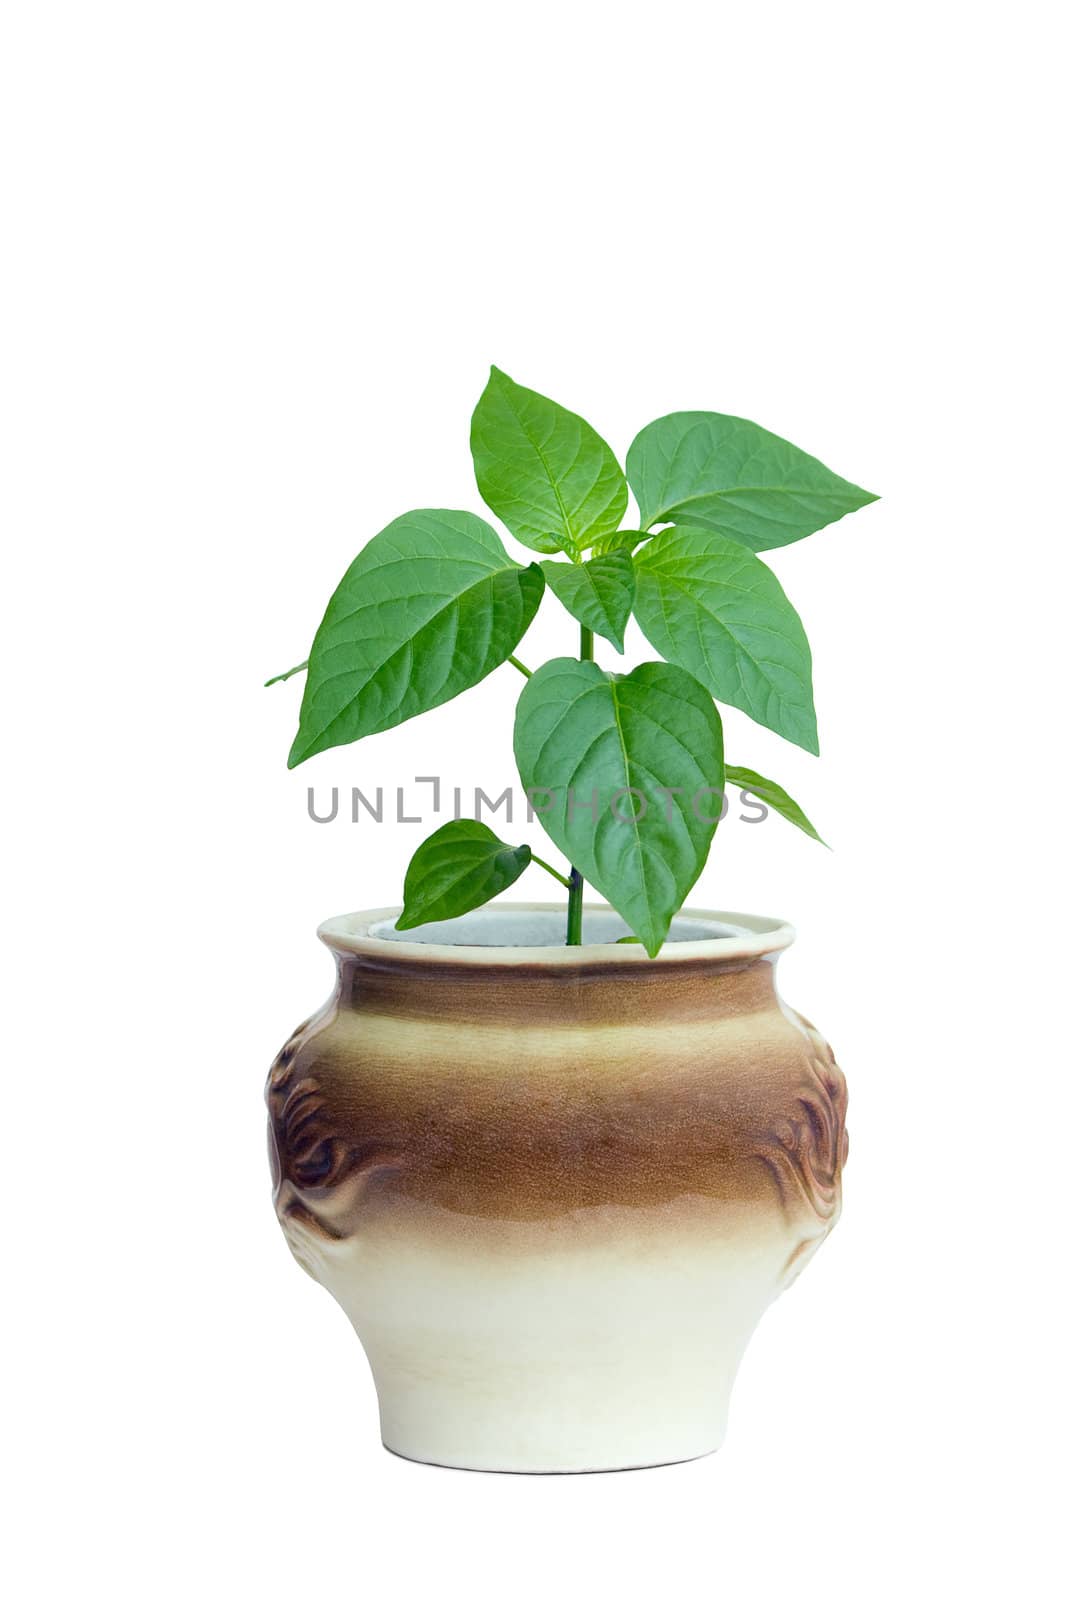 Plant in a pot, isolated on a white background.